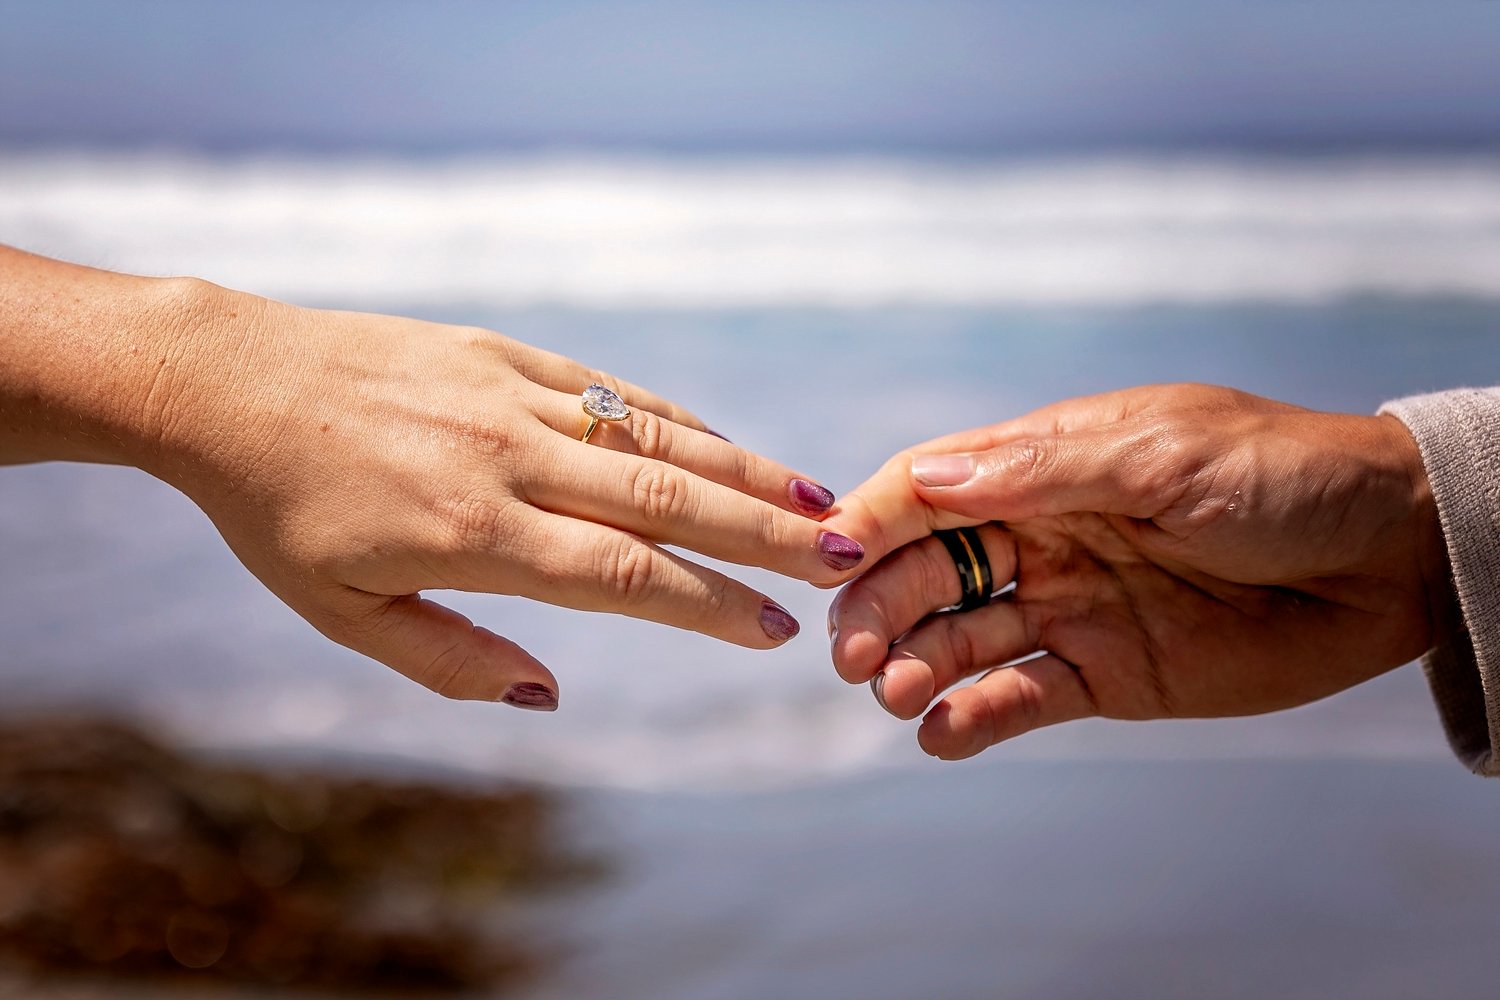 couple slowly separating hands while focused on the engagement ring